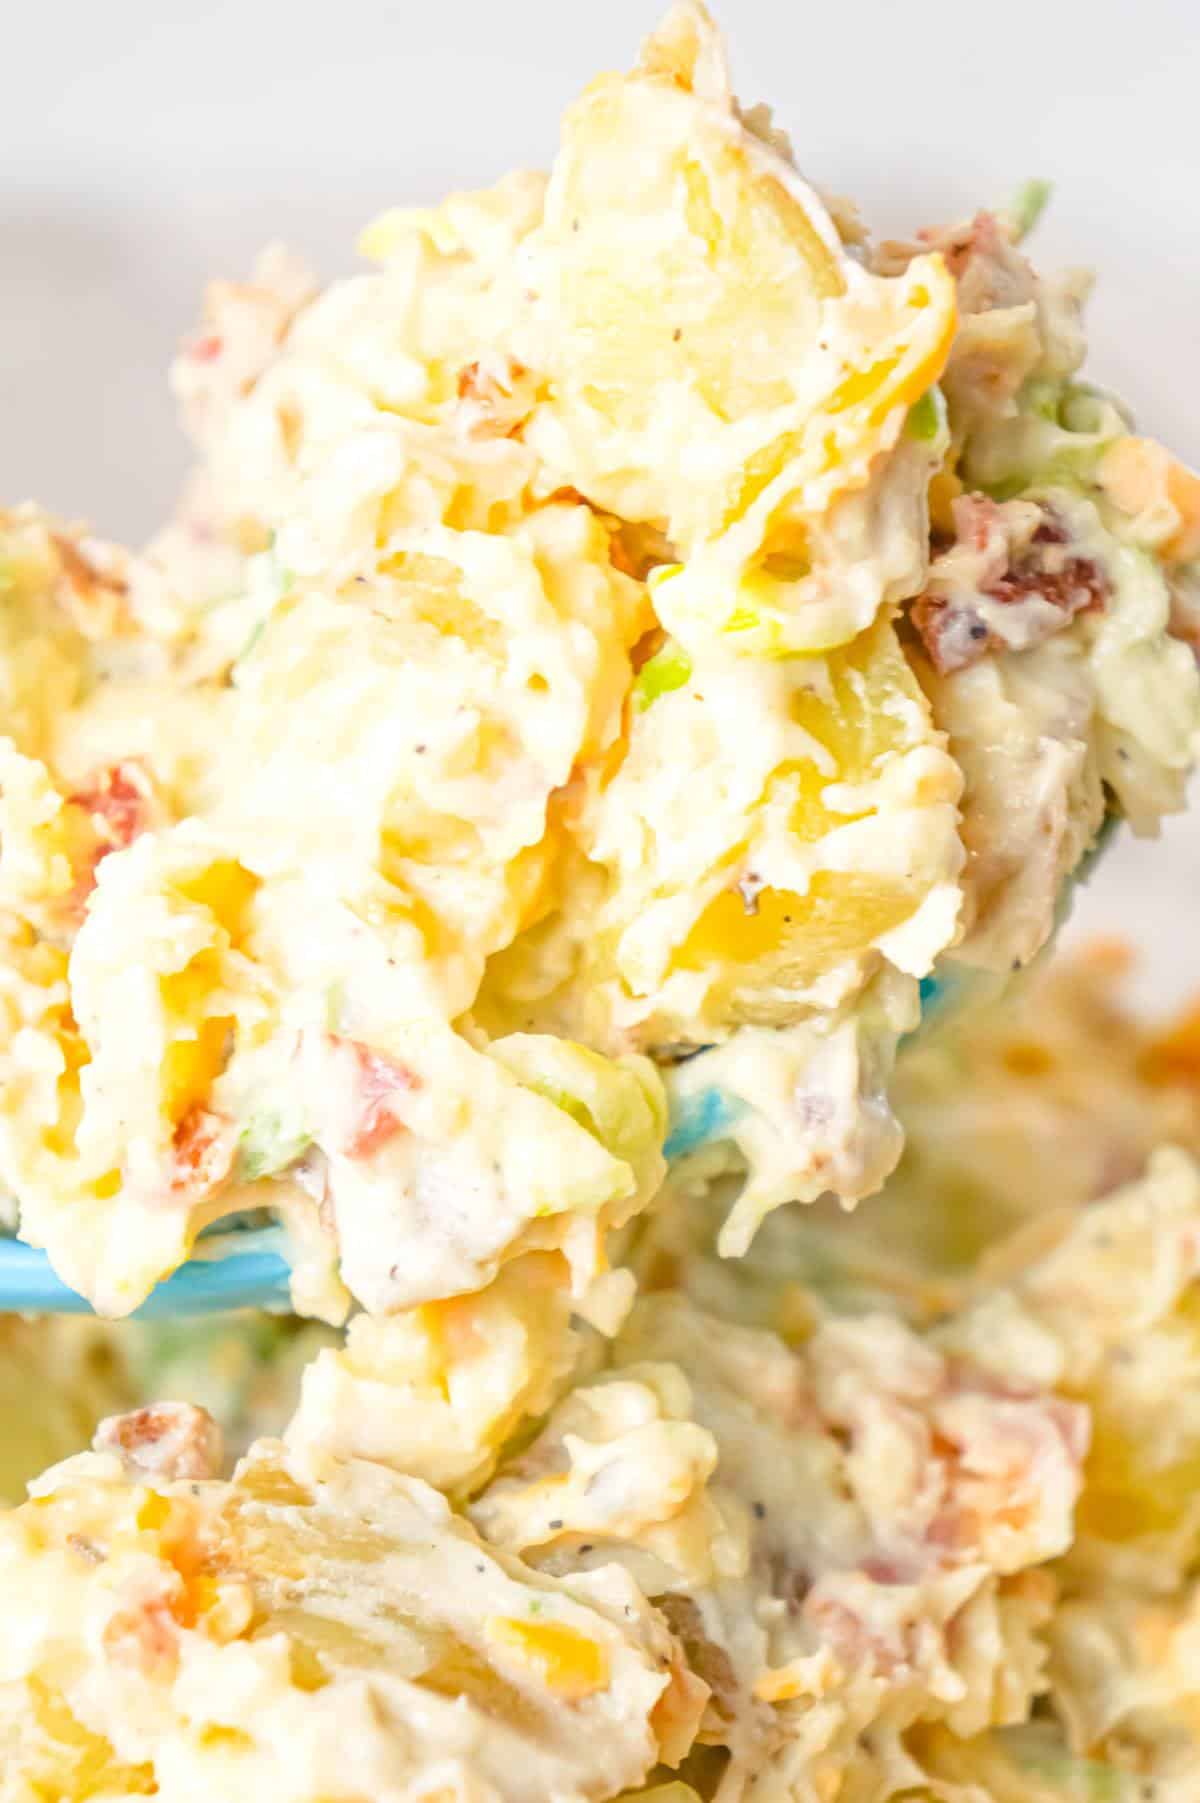 Cheddar Bacon Ranch Potato Salad is a creamy cold side dish recipe made with Yukon gold potatoes and loaded with crumbled bacon, cheddar cheese, chopped green onions, mayo and ranch dressing.